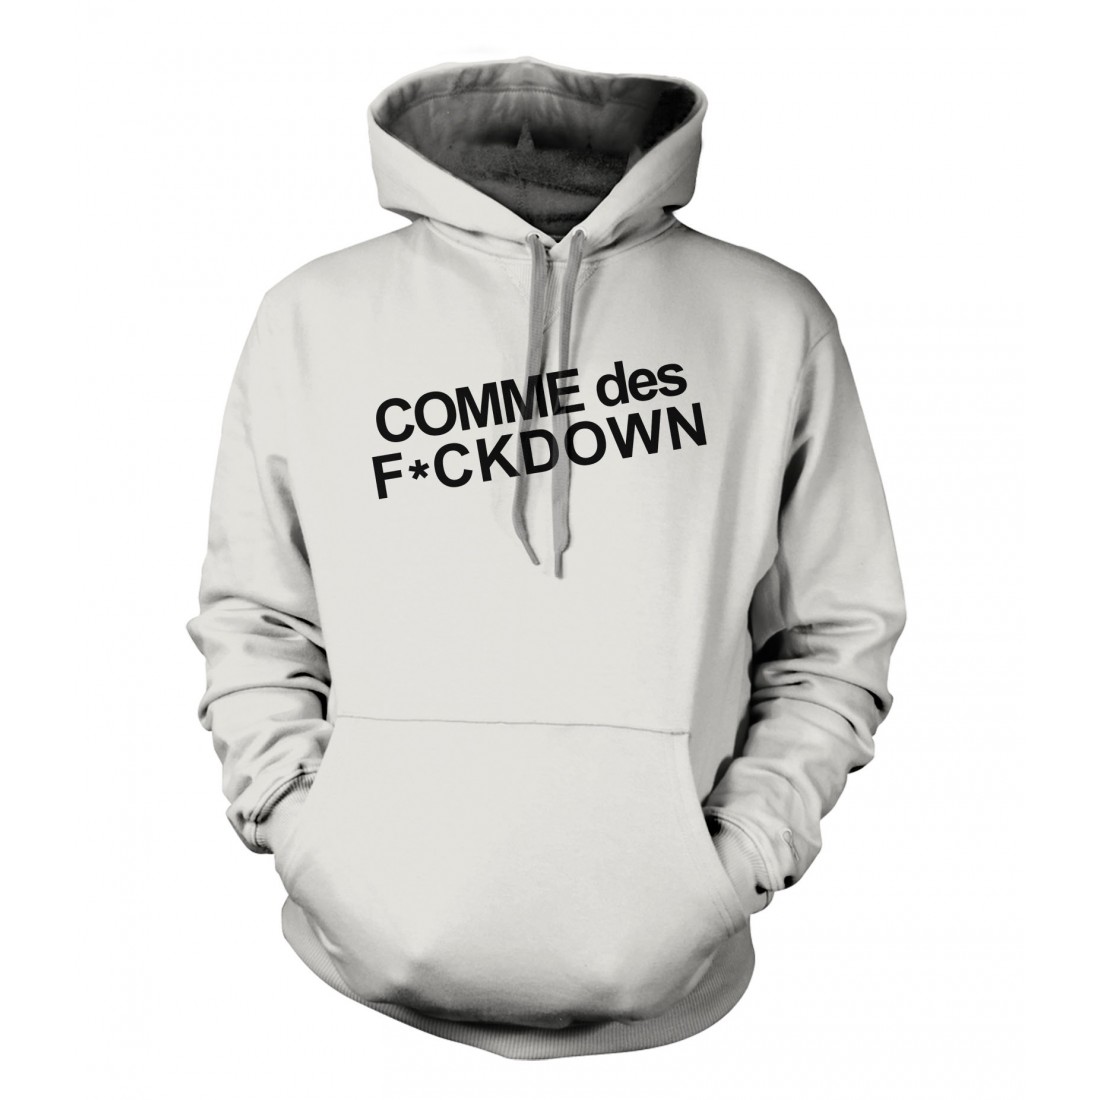 F de s. Very cool худи. Coolest Hoodie. Research одежда. SSUR одежда.